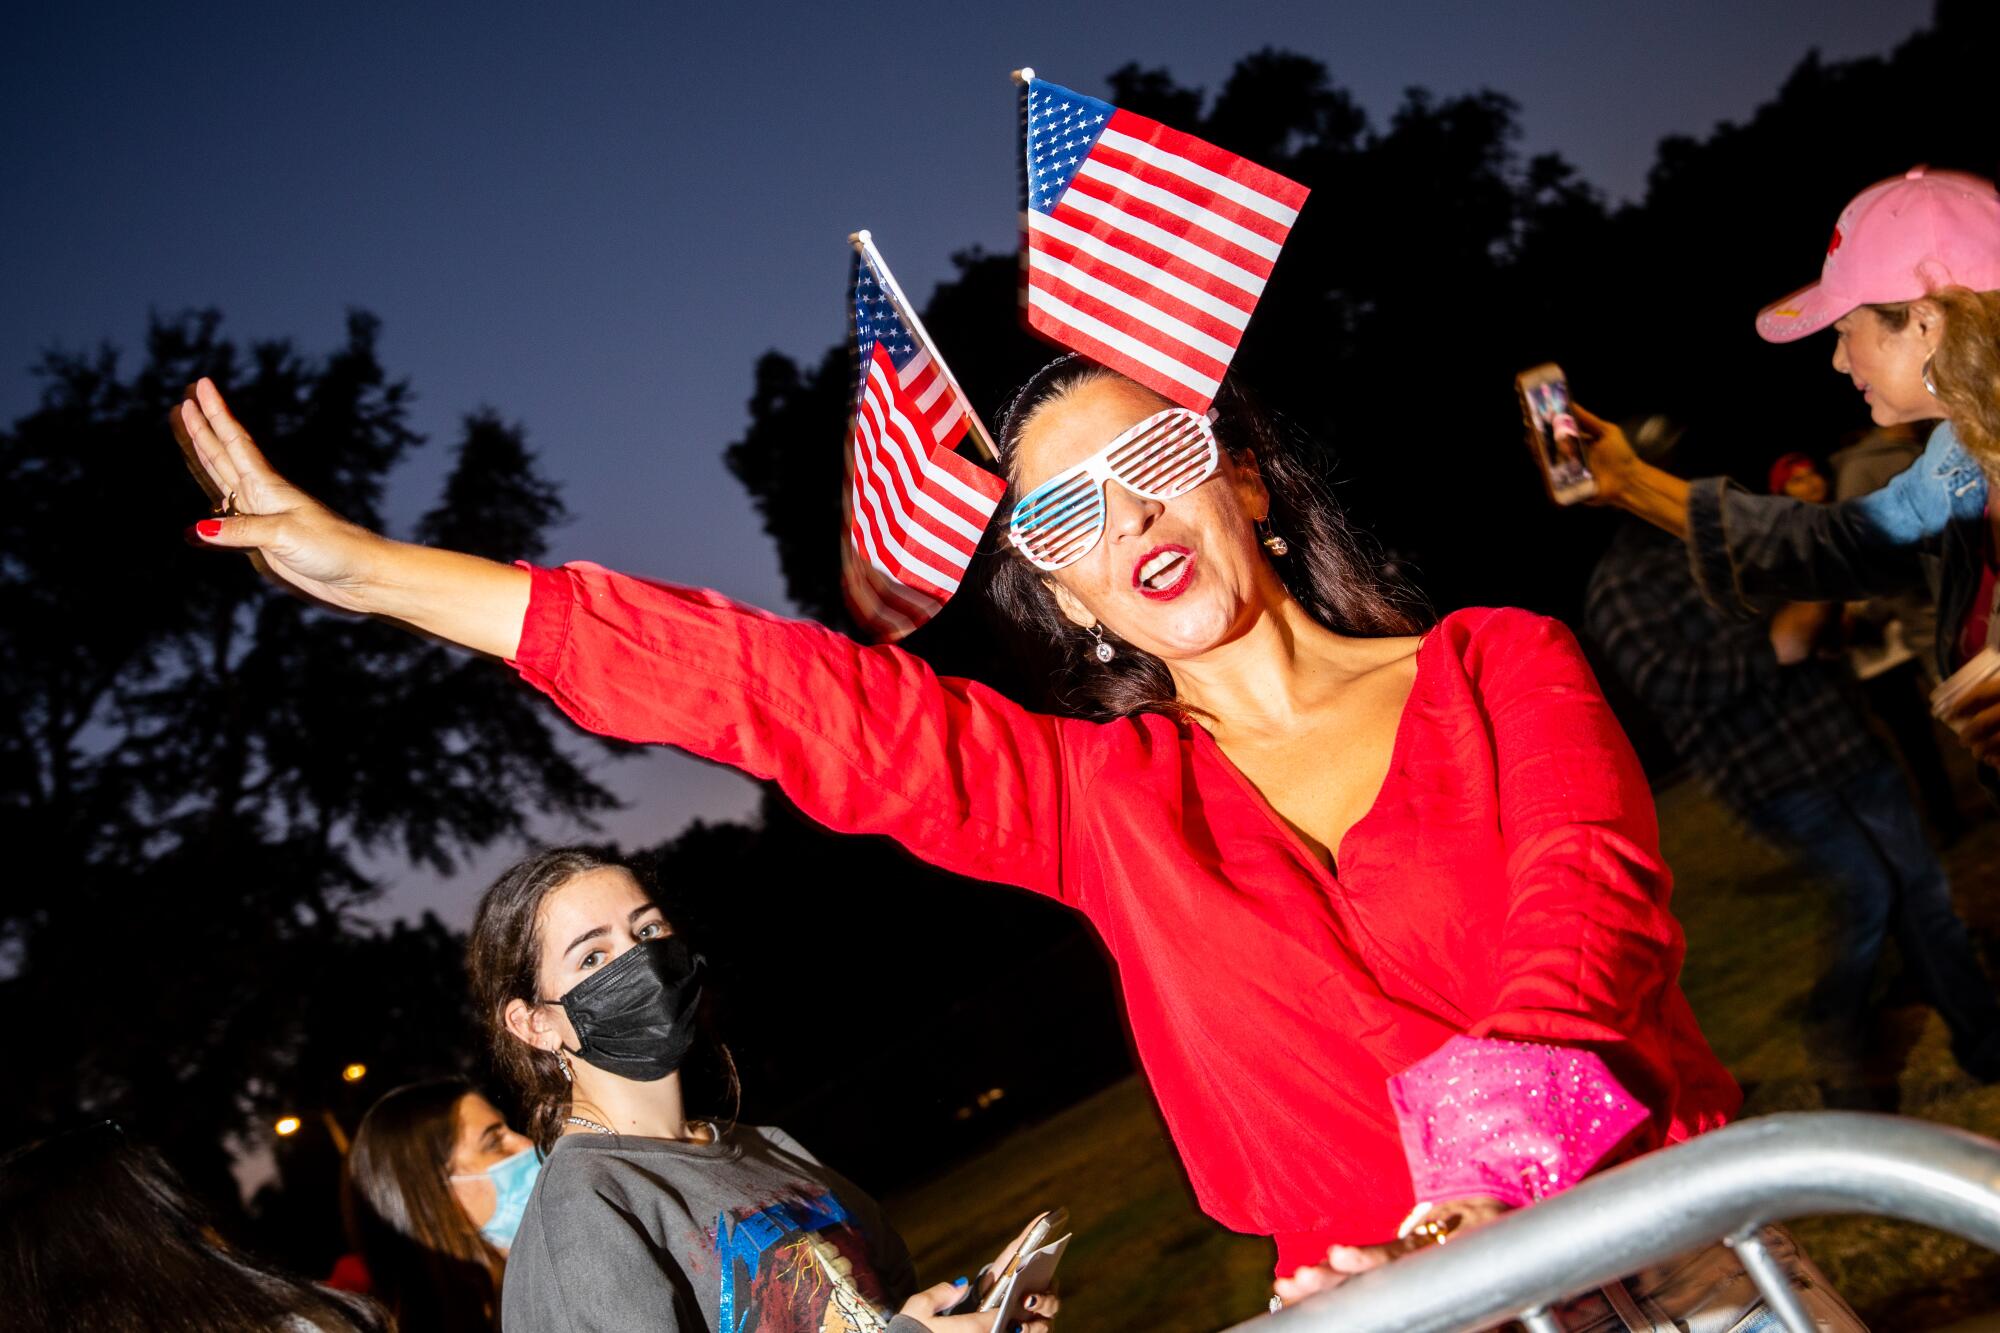 Faviala Raley of Ventura holds up four fingers, signaling four more years for President Trump, on Tuesday night.